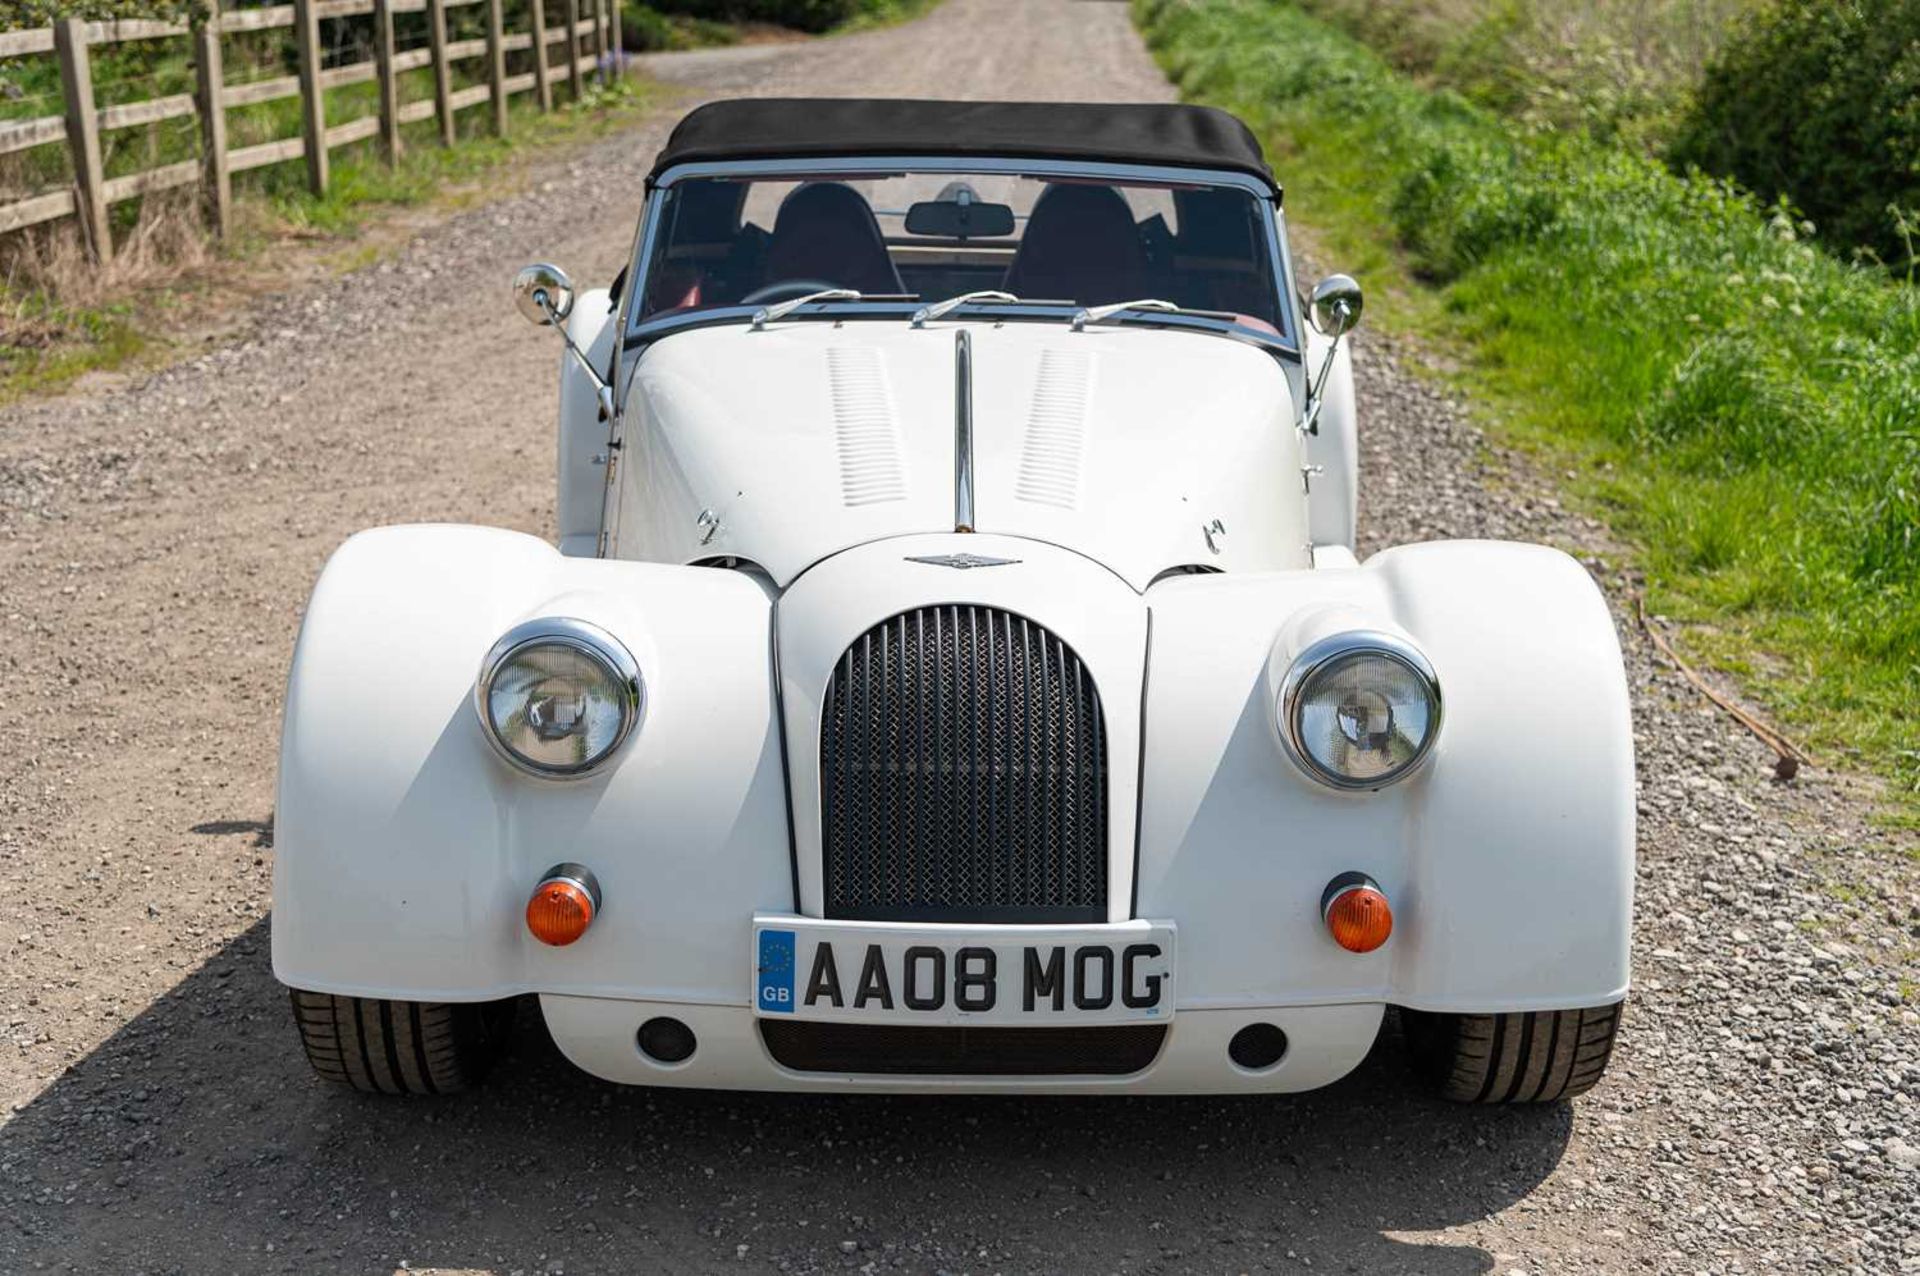 2012 Morgan Plus 8 ***NO RESERVE*** Believed to be one of just 60 produced and with MOT records supp - Image 4 of 74